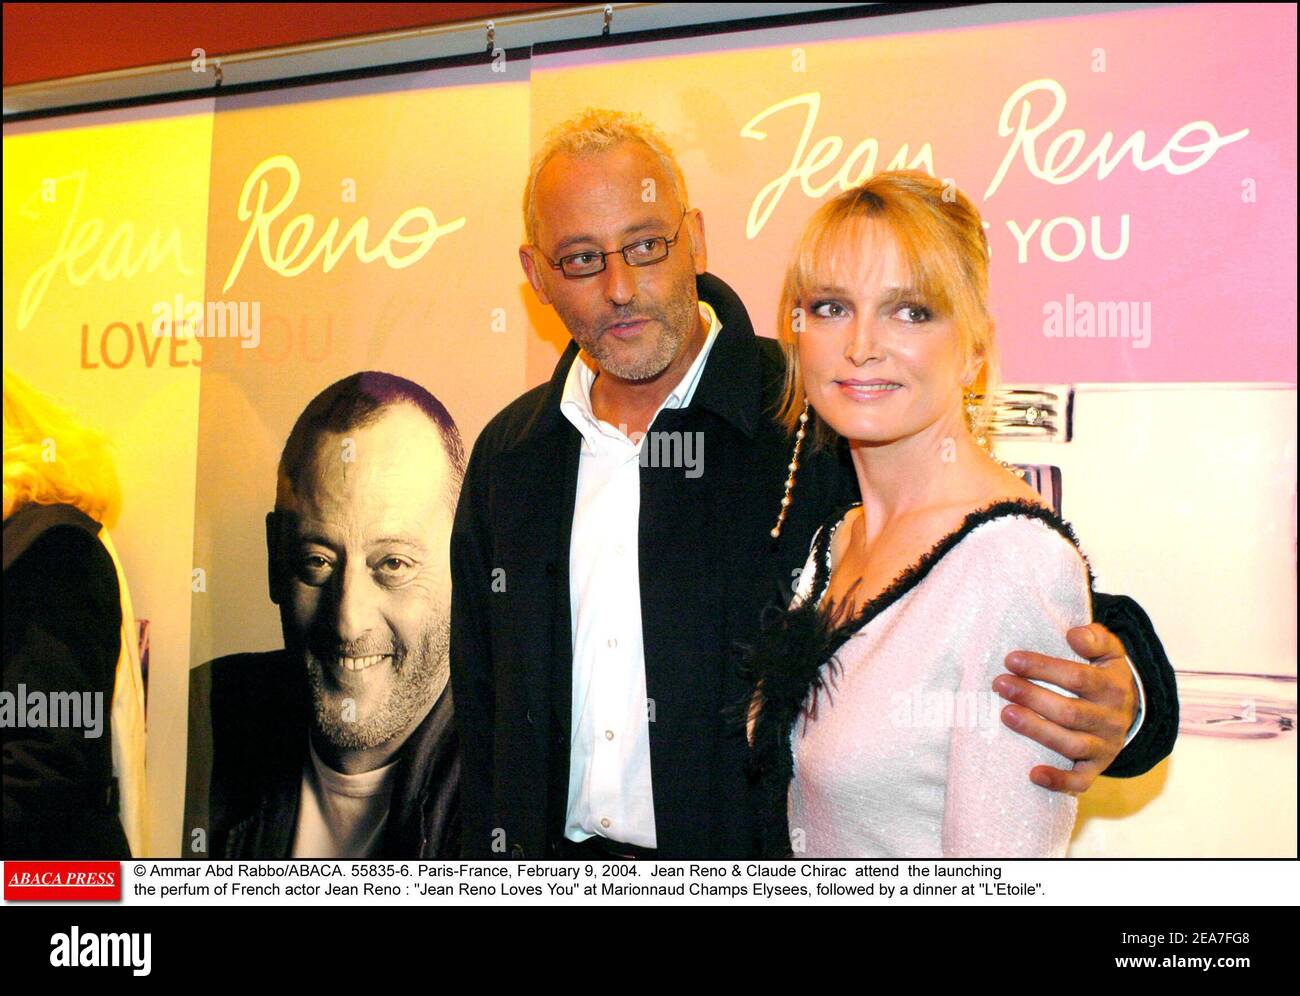 Ammar Abd Rabbo/ABACA. 55835-6. Paris-France, February 9, 2004. Jean Reno &  Claude Chirac attend the launching of the perfume of French actor Jean Reno  : Jean Reno Loves You at Marionnaud